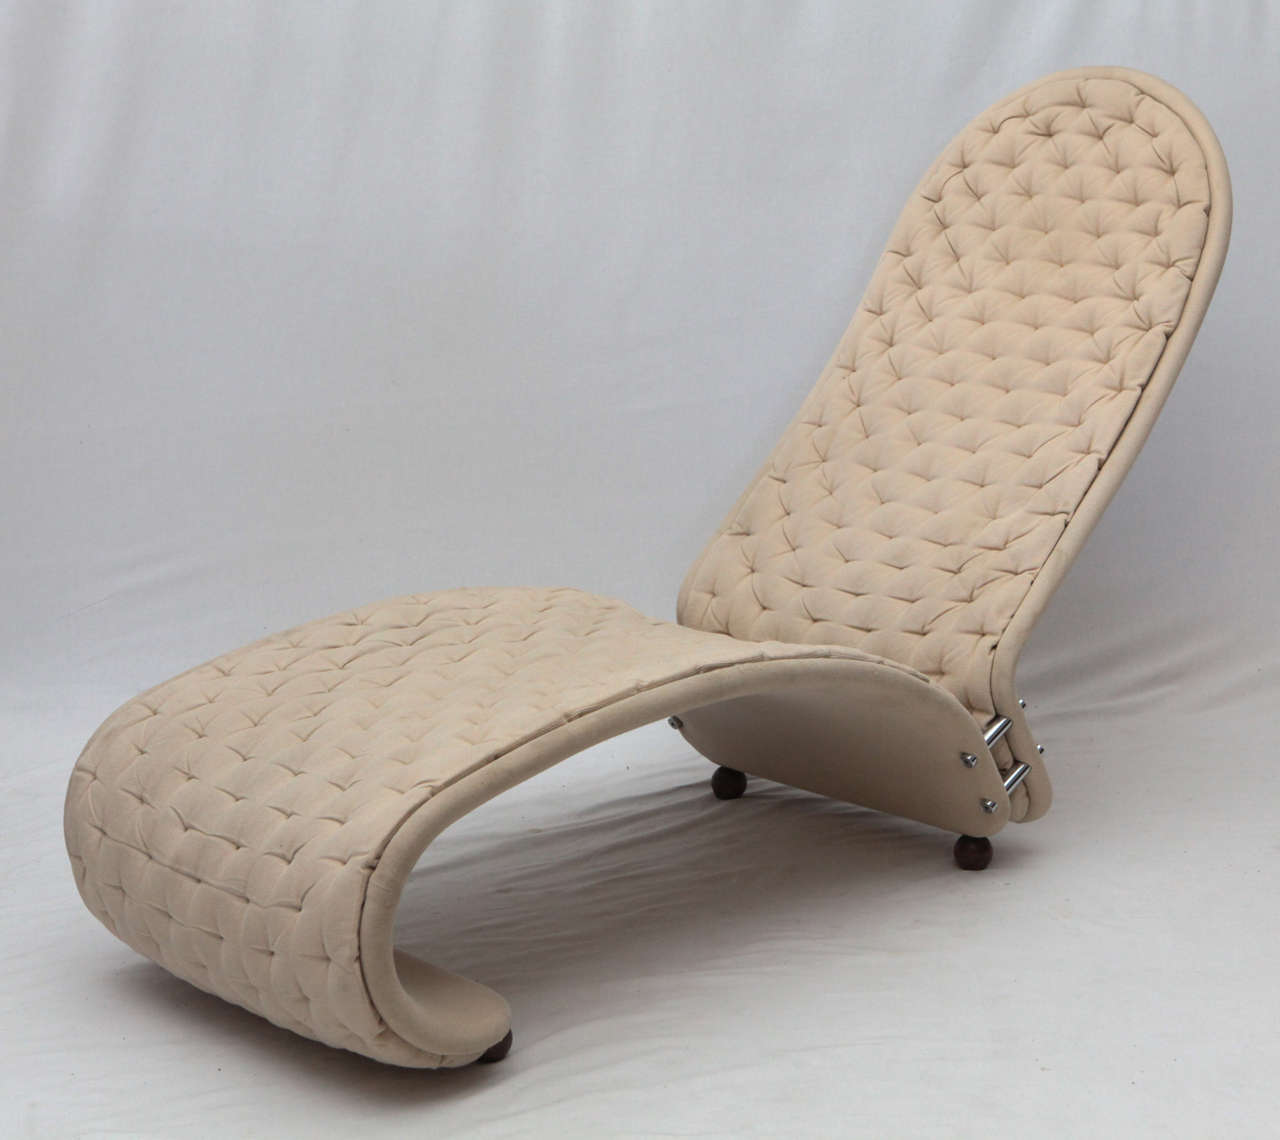 Verner Panton chaise from the system 1-2-3 series produced By Fritz Hansen.  Store formerly known as ARTFUL DODGER INC